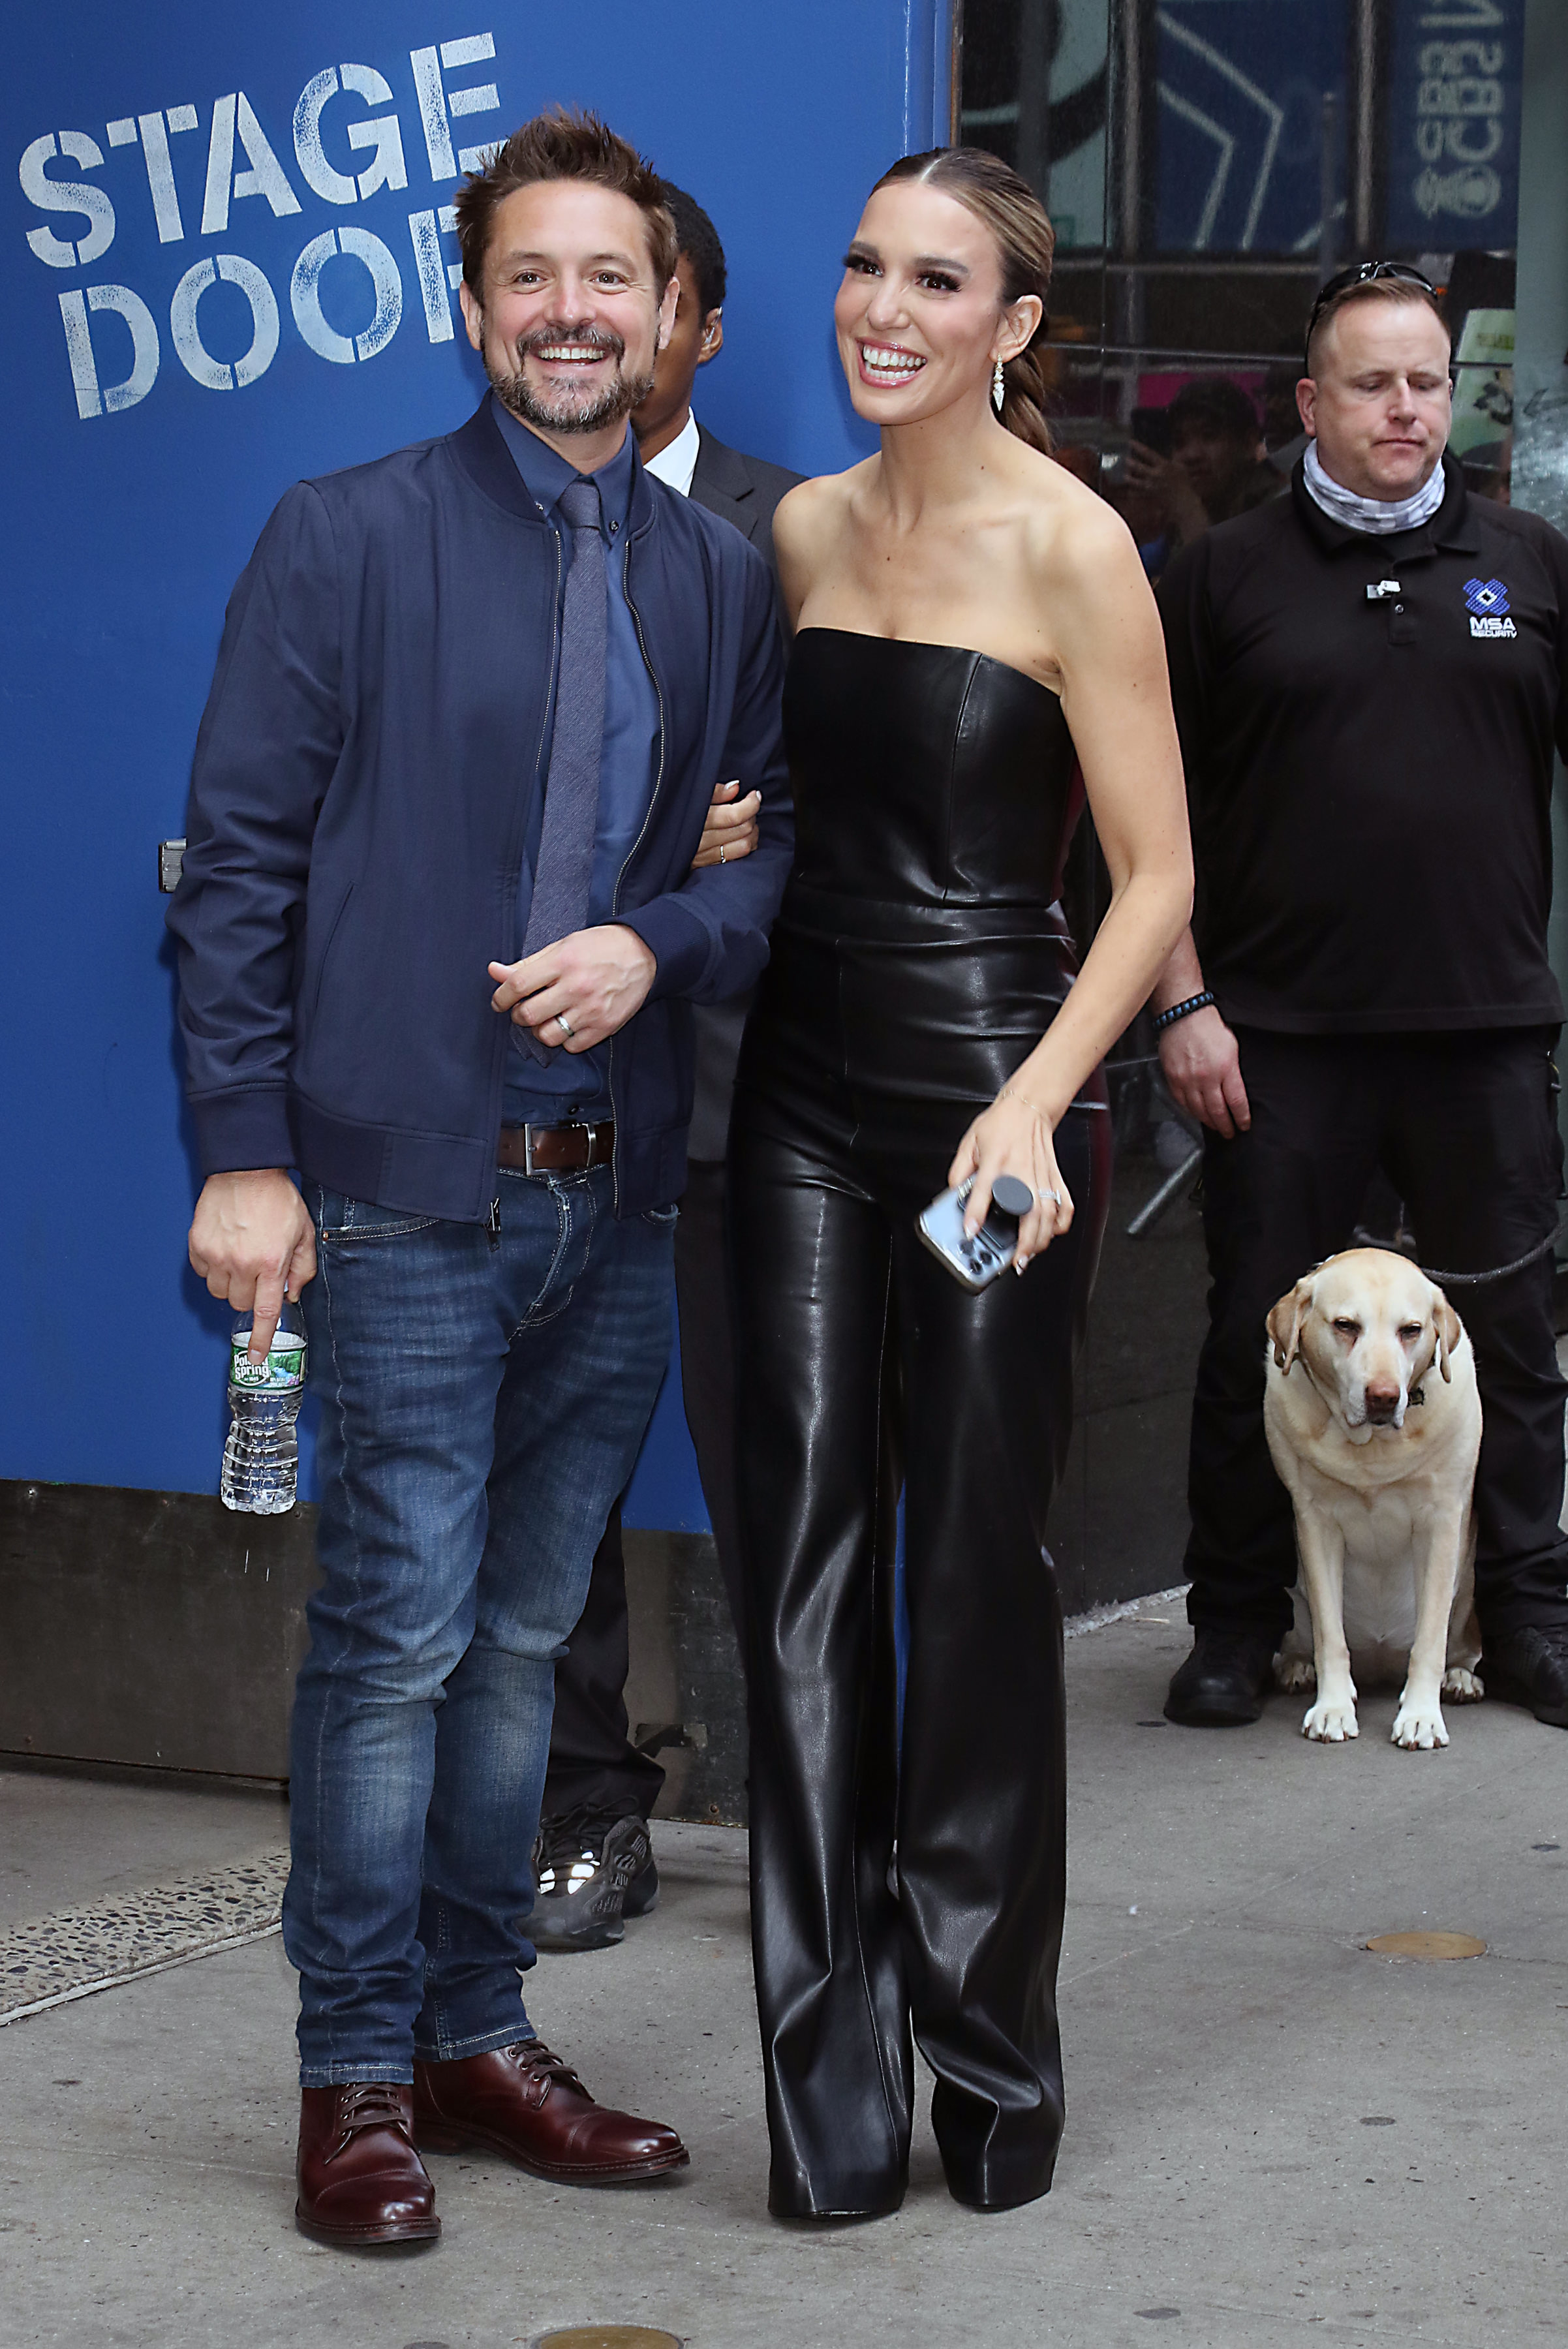 Will Friedle and Christy Carlson Romano stand together outside with their arms linked. Johansson is wearing a strapless leather jumpsuit, with a dog beside them